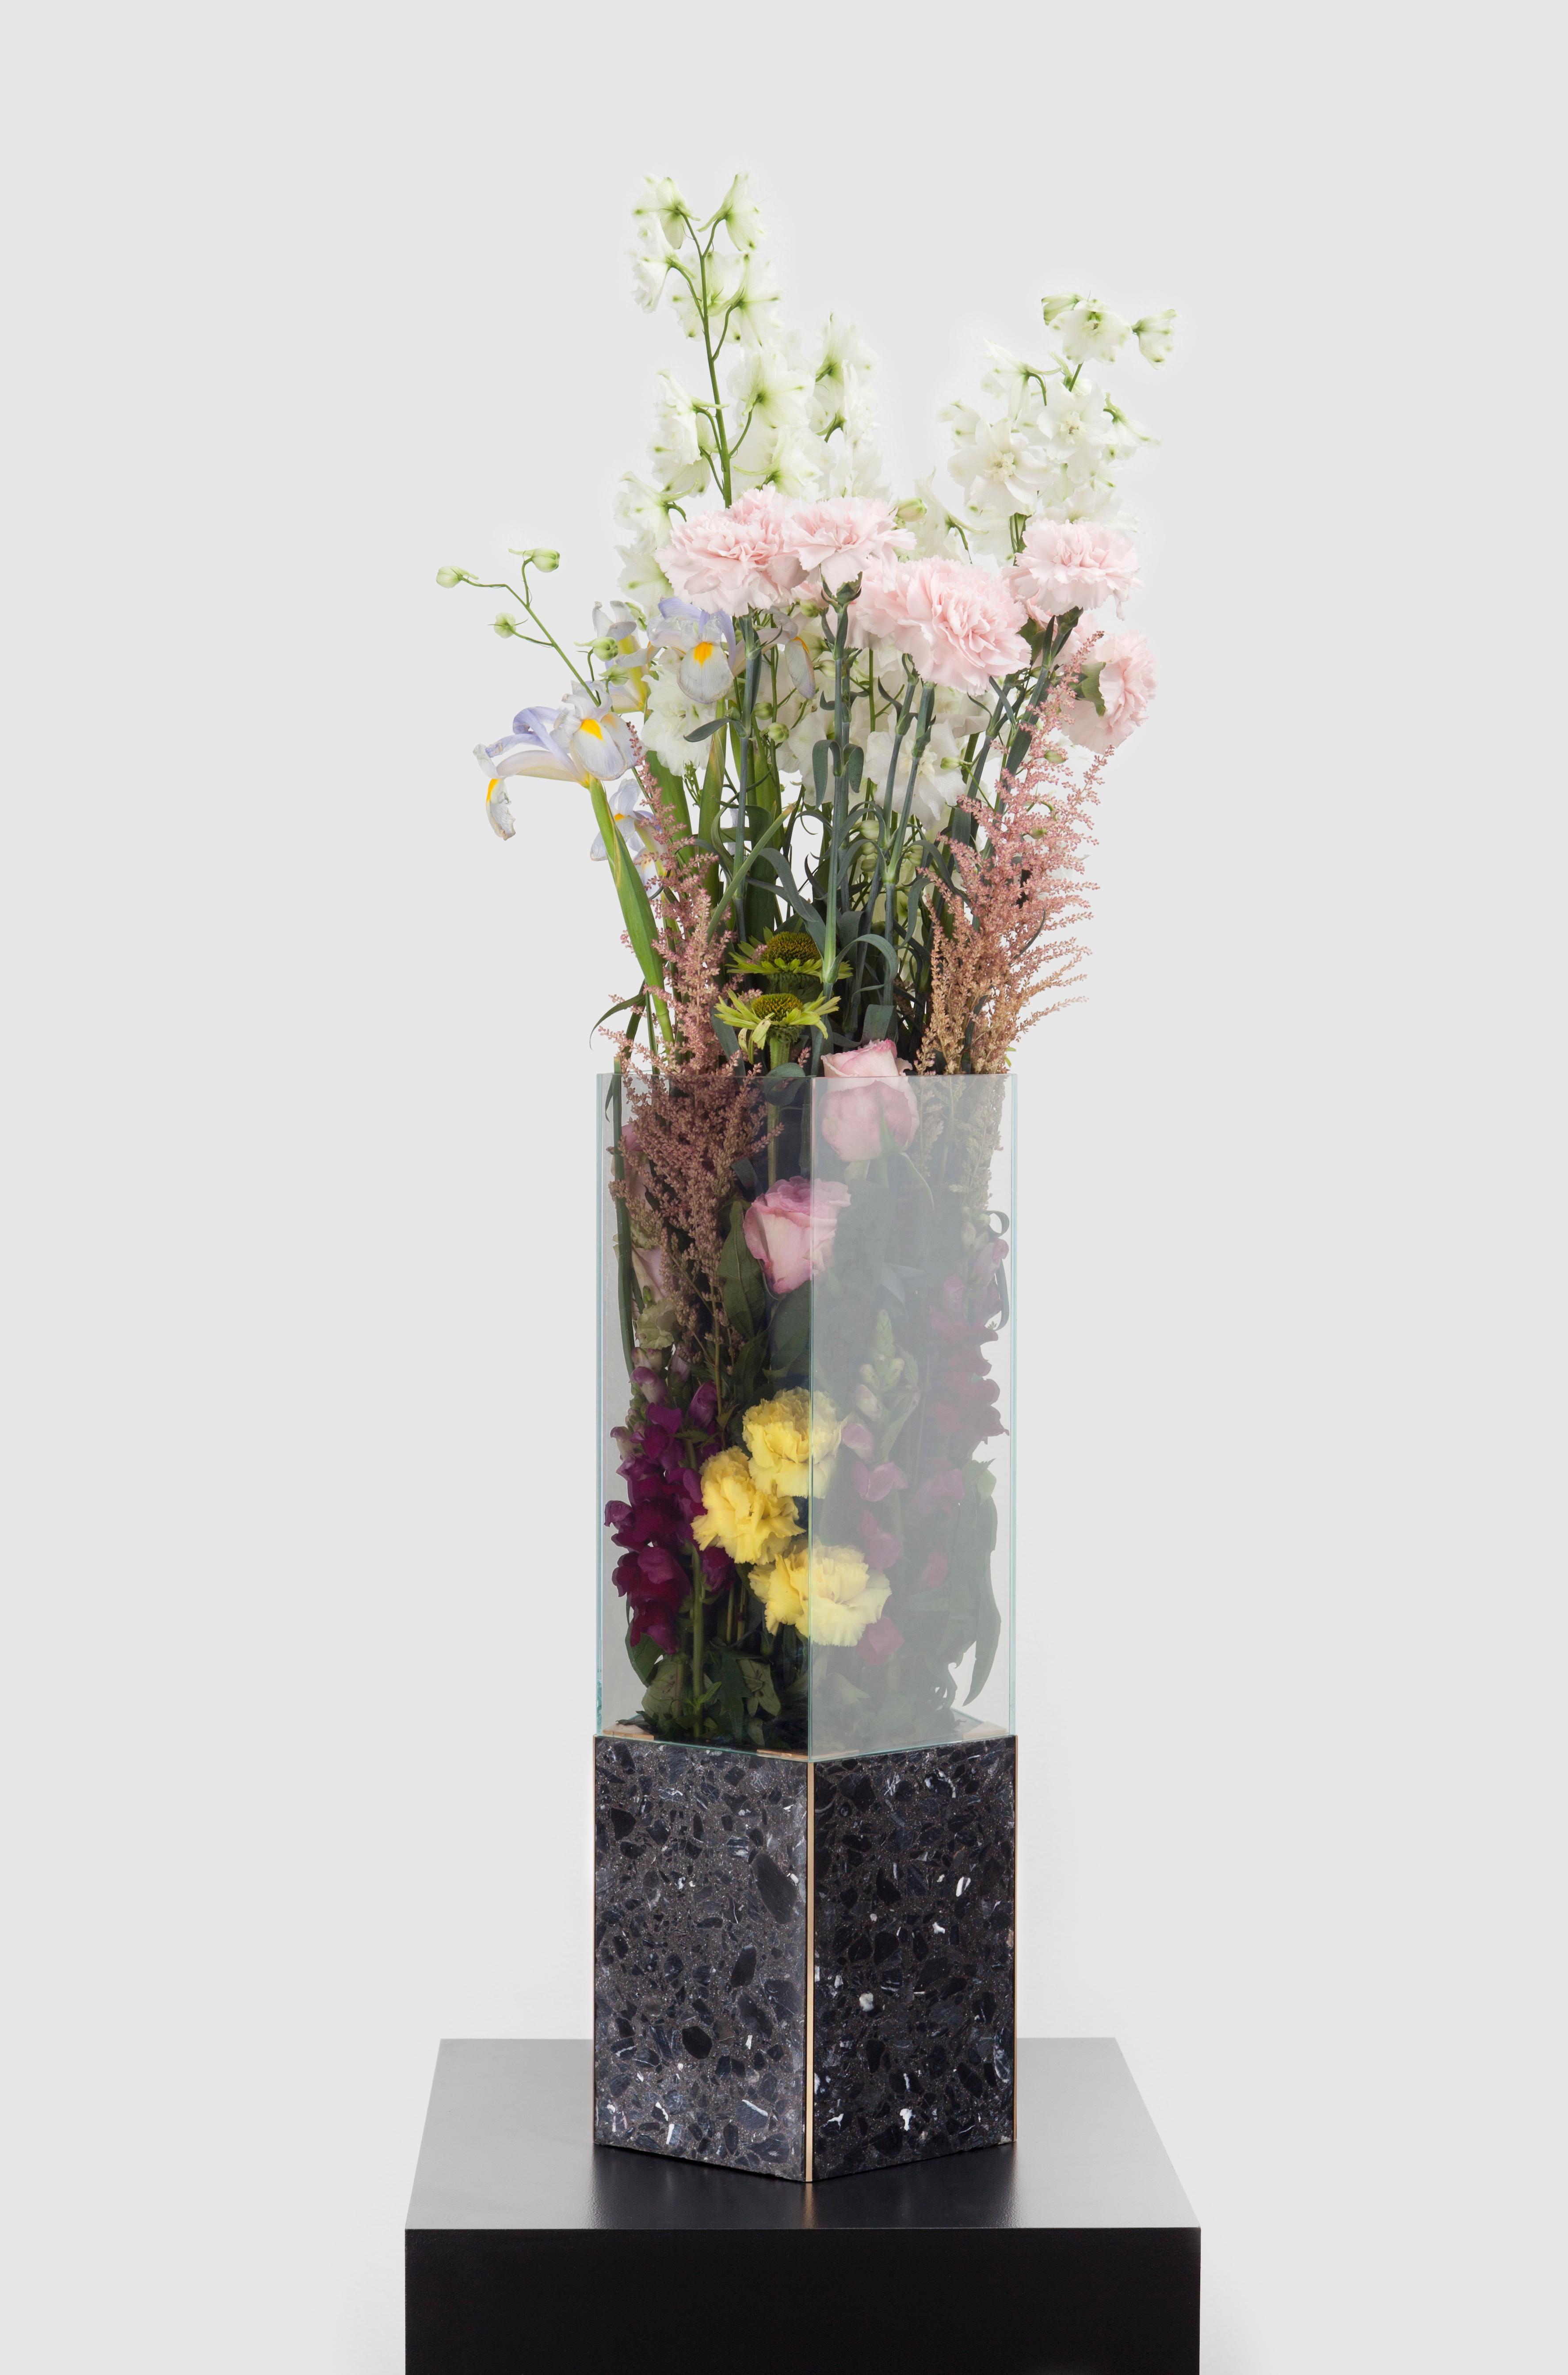 Black Terrazo Pentagonal Narcissus vase by Tino Seubert
Dimensions: Ø24 x H 60 cm.
Materials: Black terrazzo, brass, mirrored glass.

Tino Seubert
When he first made his now signature wicker and aluminium stools and benches in 2018 for a show